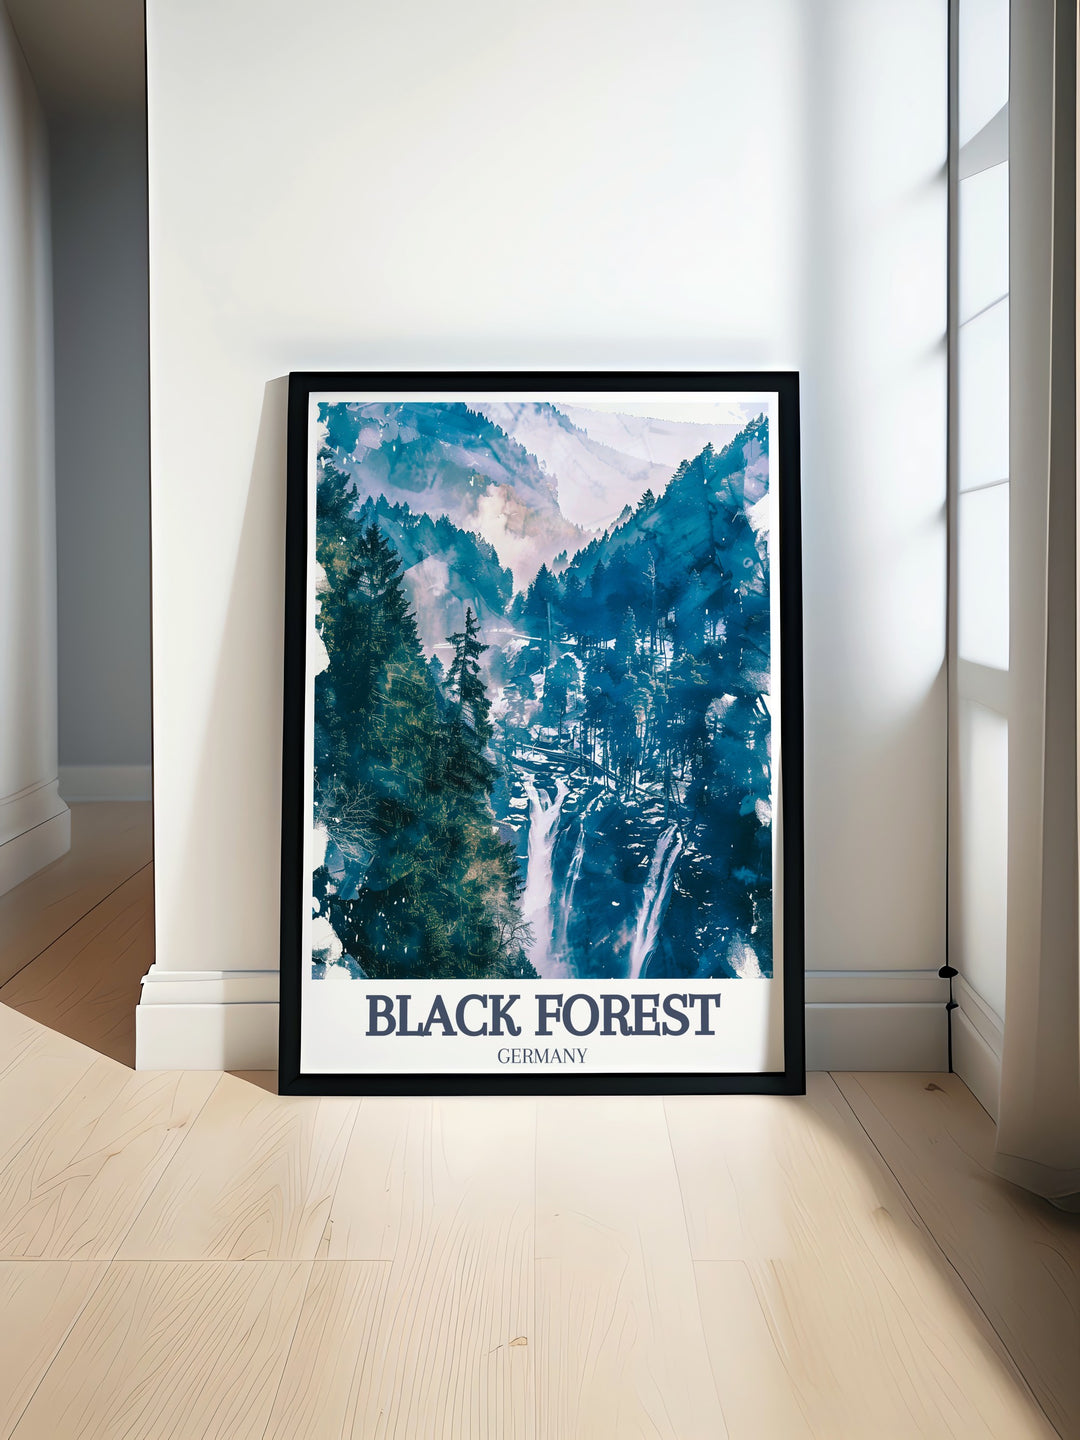 Triberg Waterfalls, Baden Wurttemberg scenic view captured in a stunning Germany Forest Print featuring the enchanting Schwarzwald landscape perfect for Black Forest decor and nature inspired home decor an ideal gift for those who love German travel art and serene forest scenes